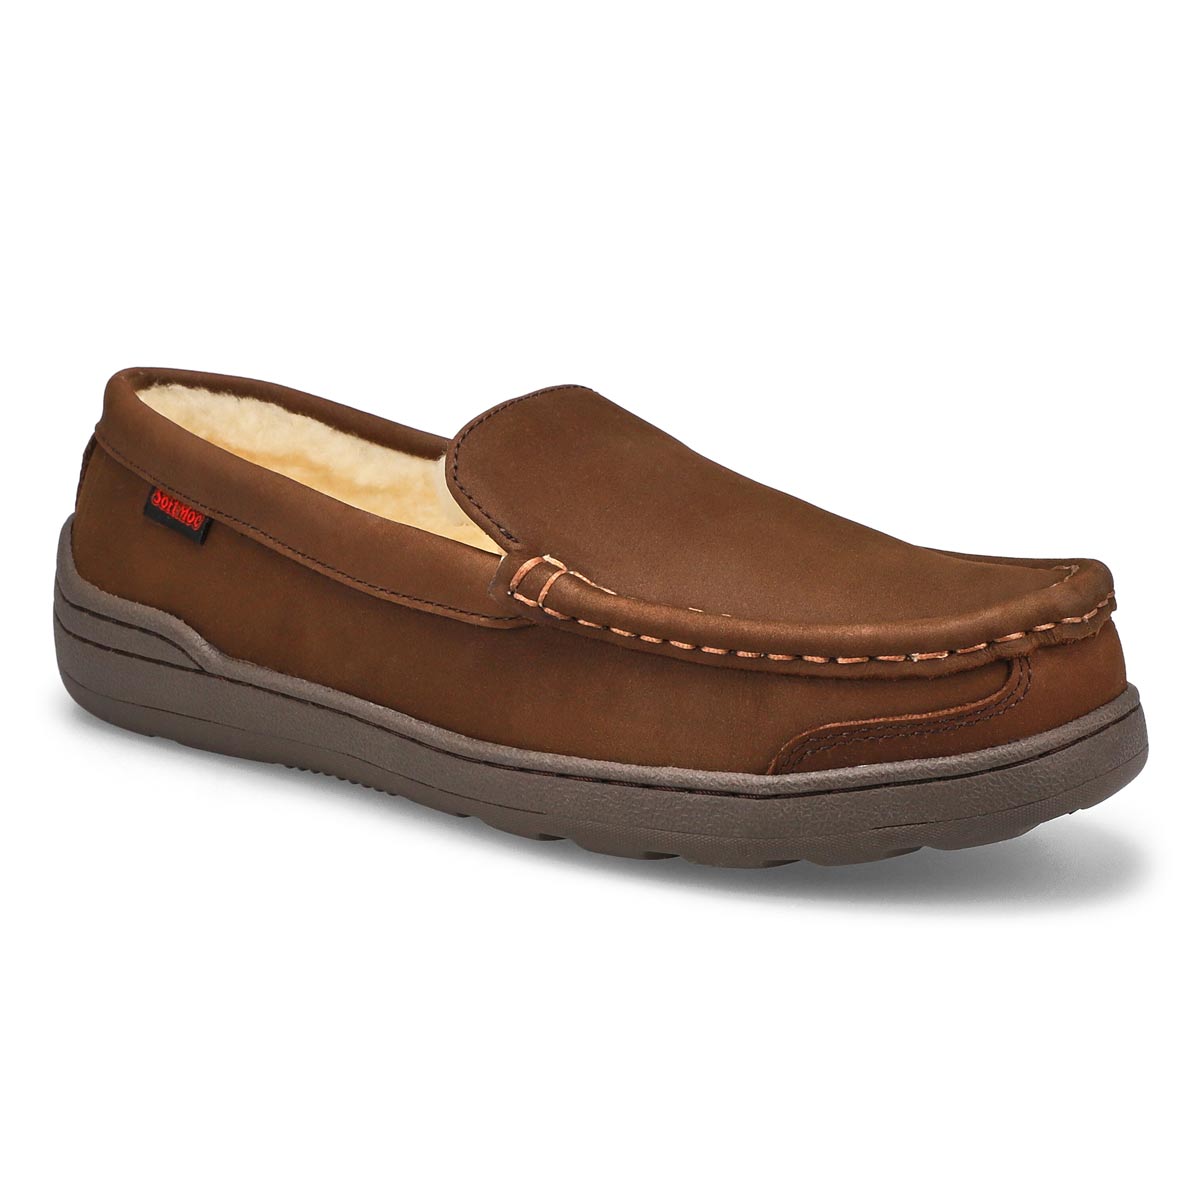 Men's Tye Moccasin With Sole - Brown Leather